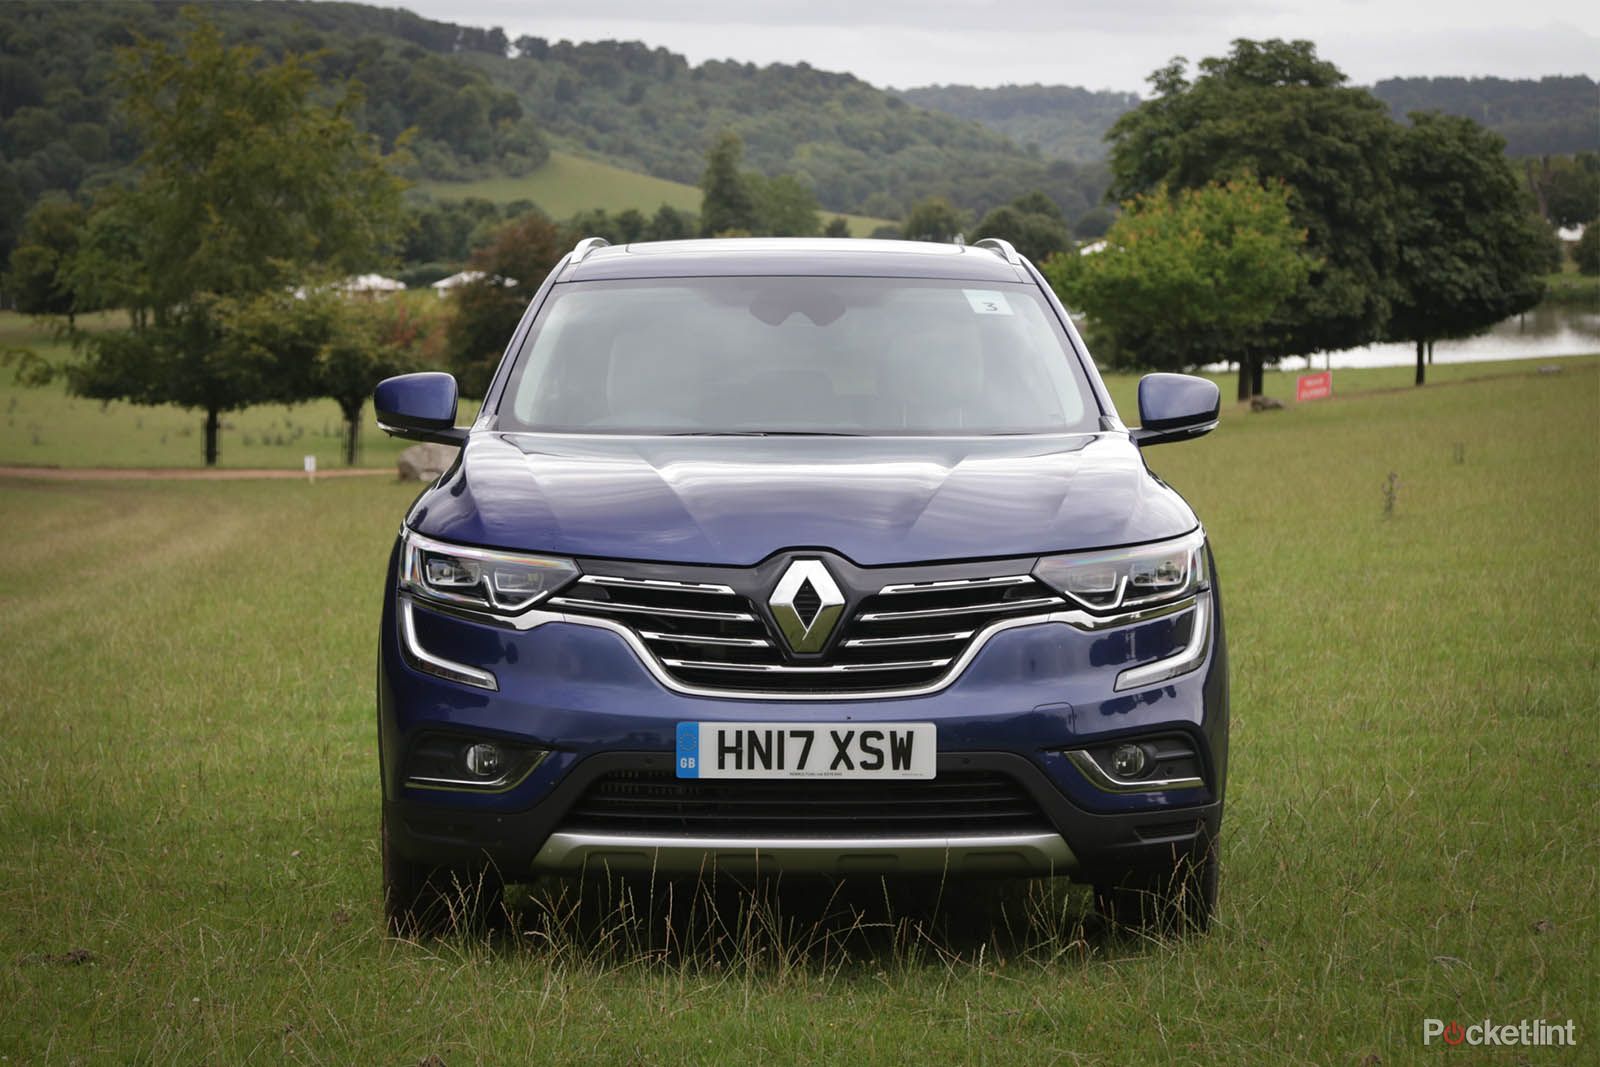 Renault Koleos review: Can the 5-seat SUV make its mark?